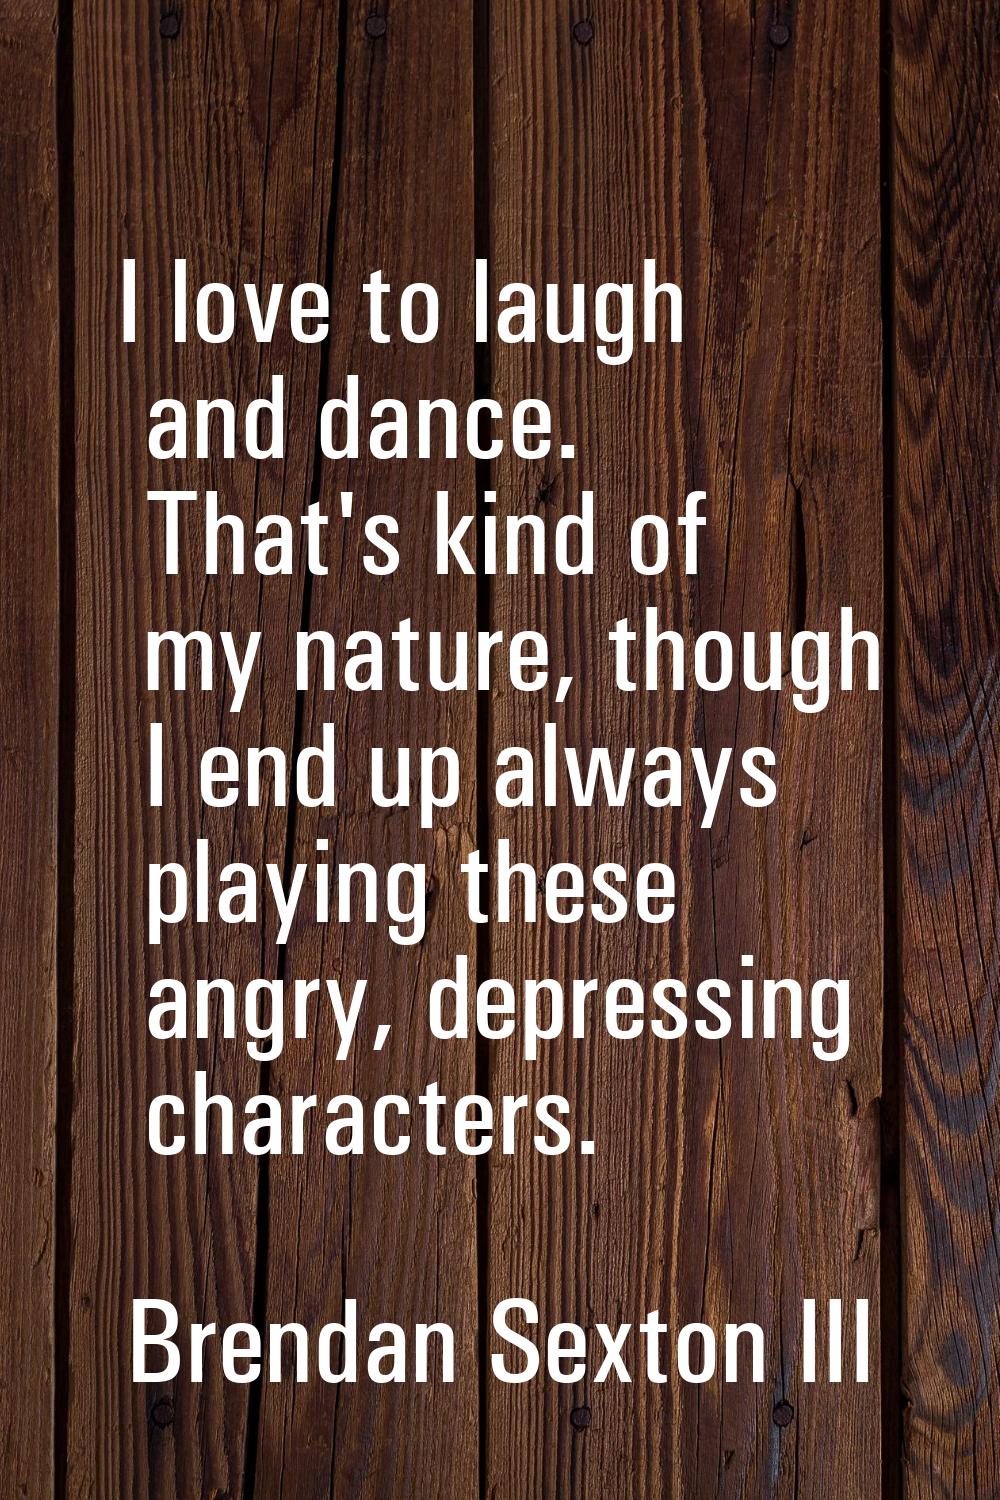 I love to laugh and dance. That's kind of my nature, though I end up always playing these angry, de